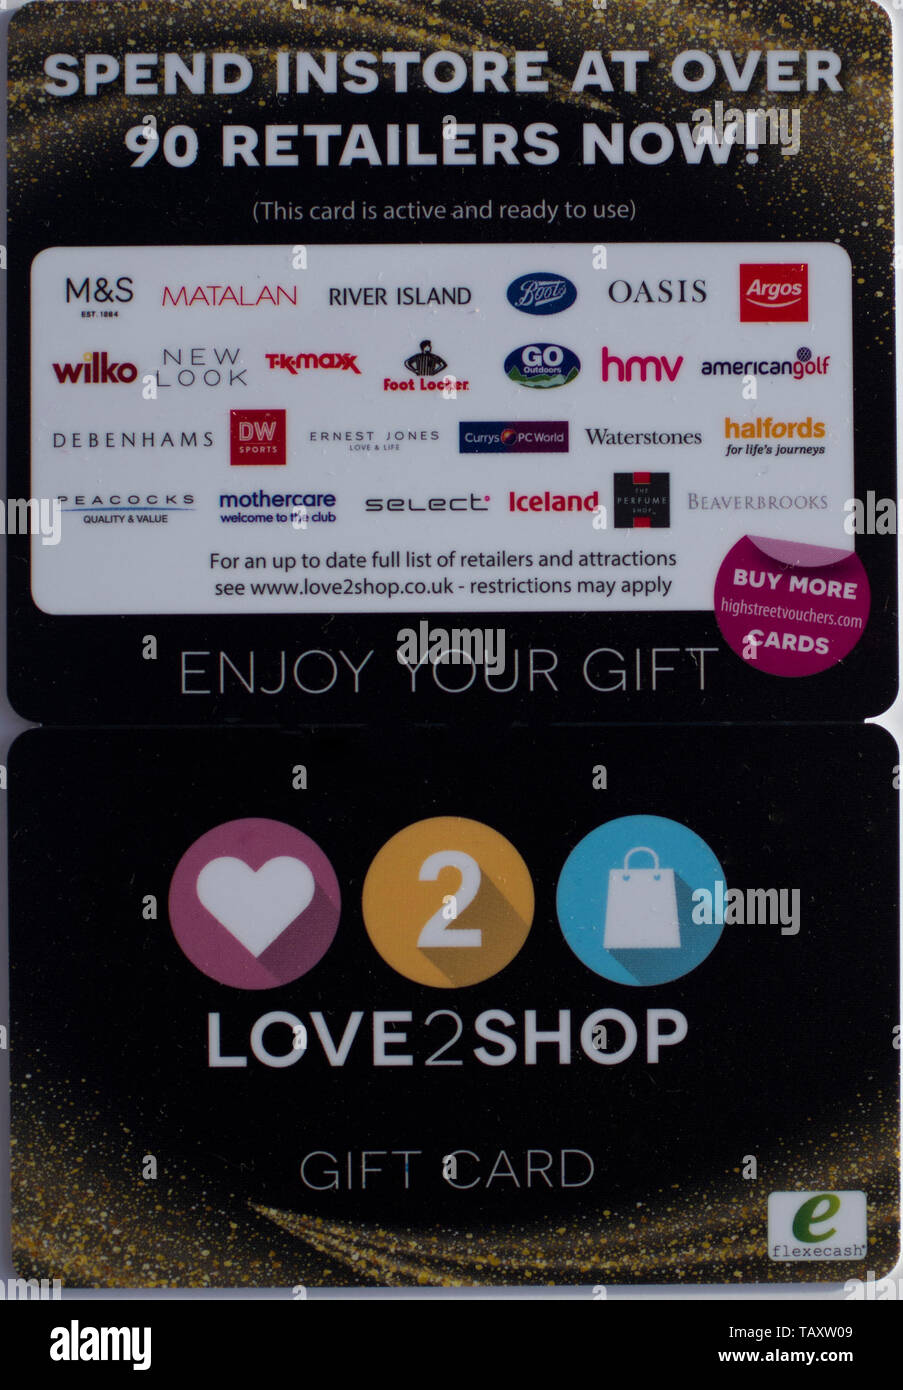 Amore dh2Shop Gift Card SHOPPING UK amore 2 negozio retail gift voucher cards nessuno Foto Stock